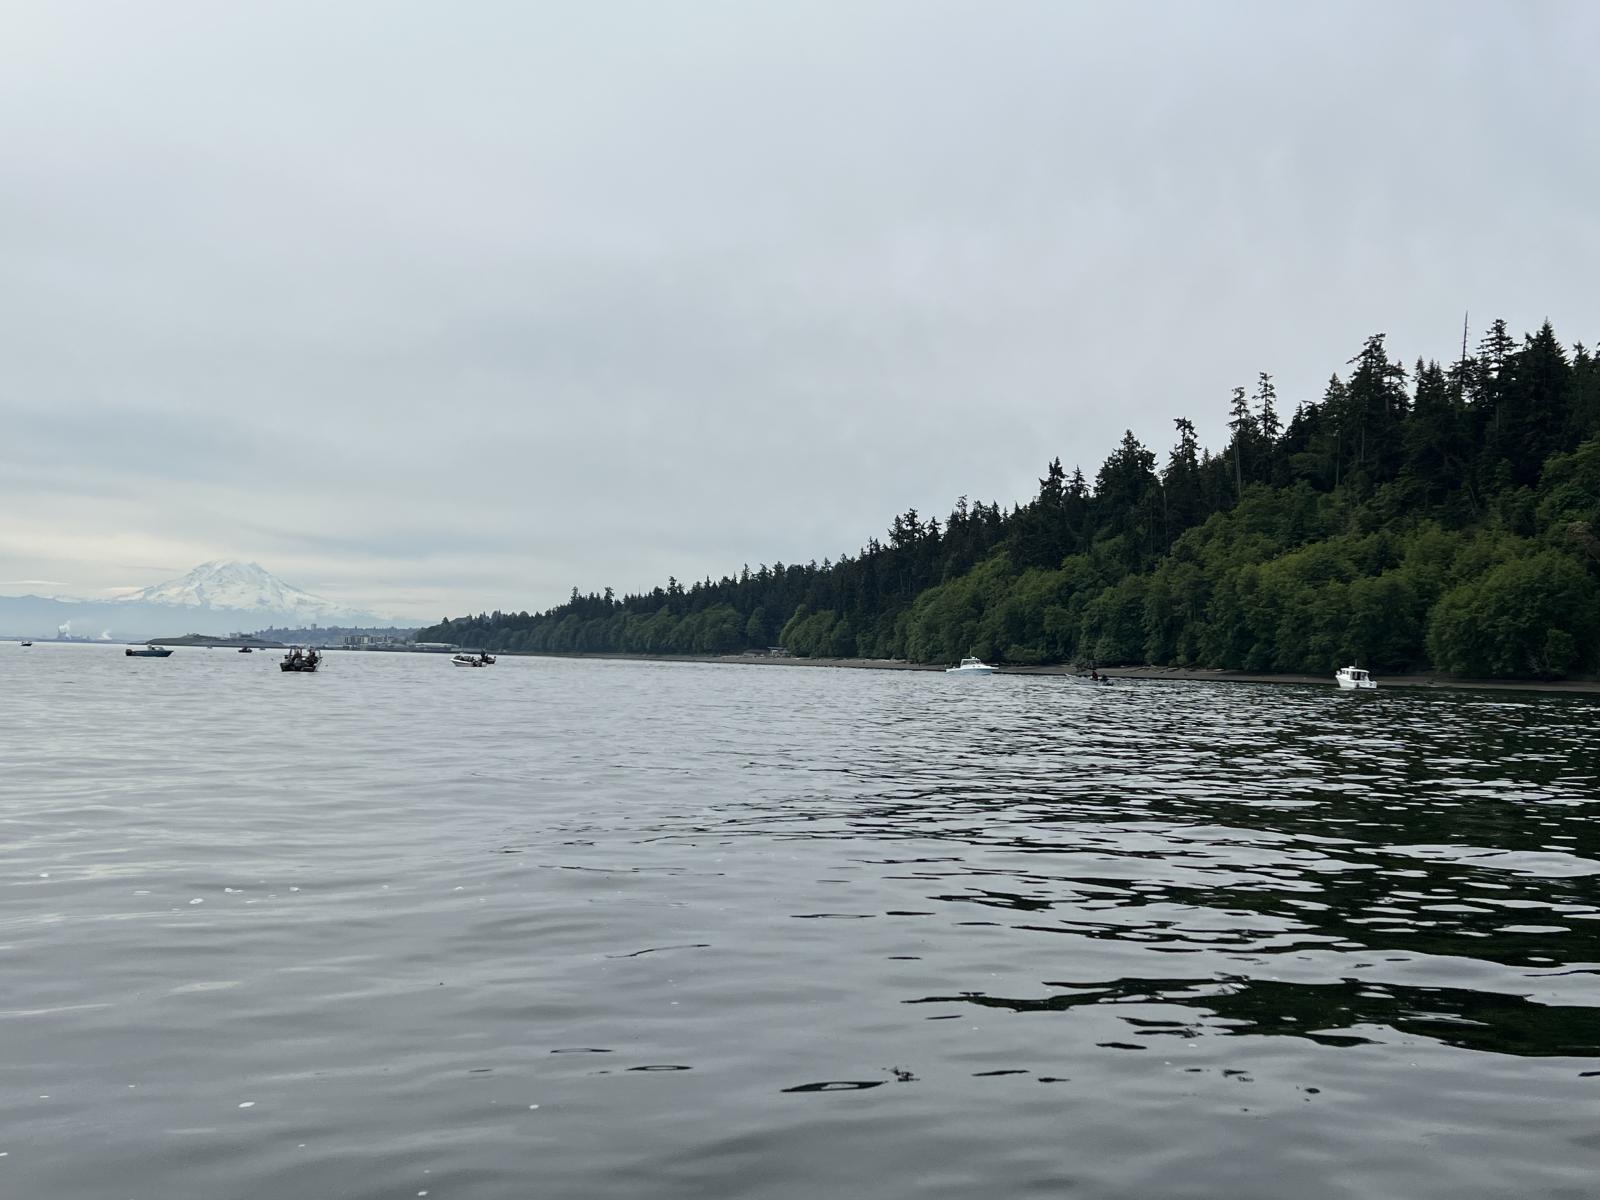 The Area 11 summer Chinook salmon fishery will temporarily close after June 3 and reopen on July 1